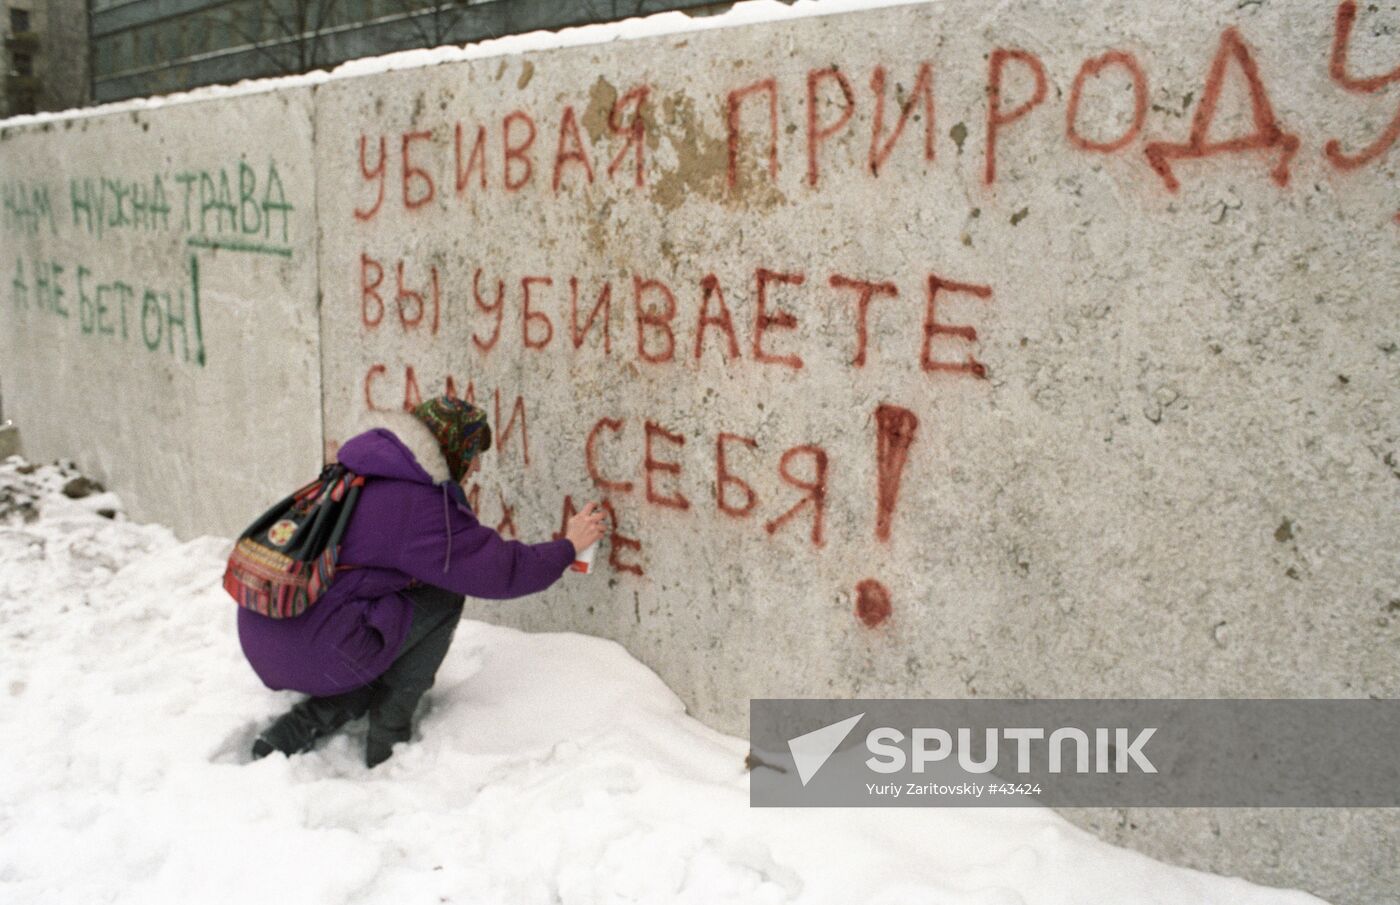 MOSCOW MUSCOVITE INSCRIPTION ENCLOSURE PROTEST ECOLOGY